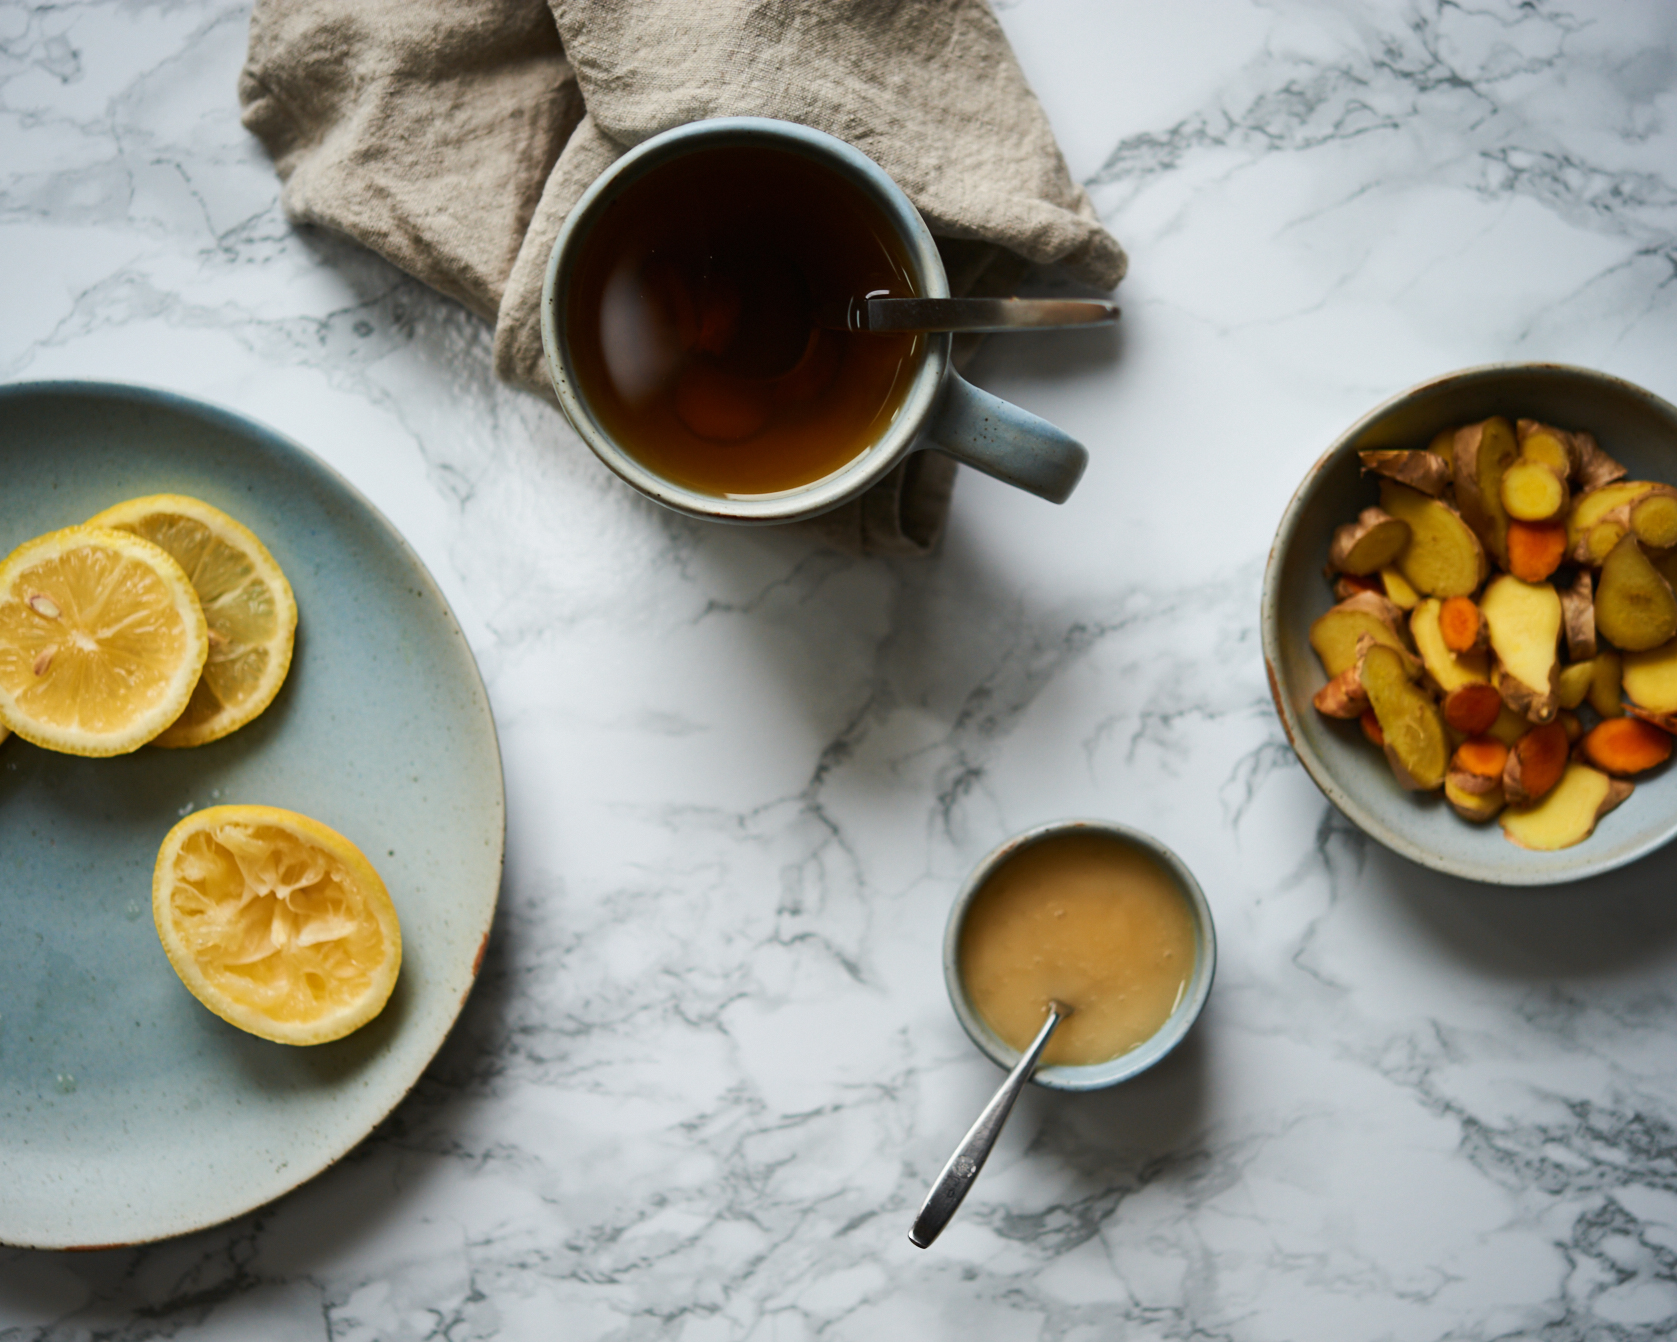 This ginger tea is also made with turmeric and is so helpful for when you're sick, have a cold or sore throat.